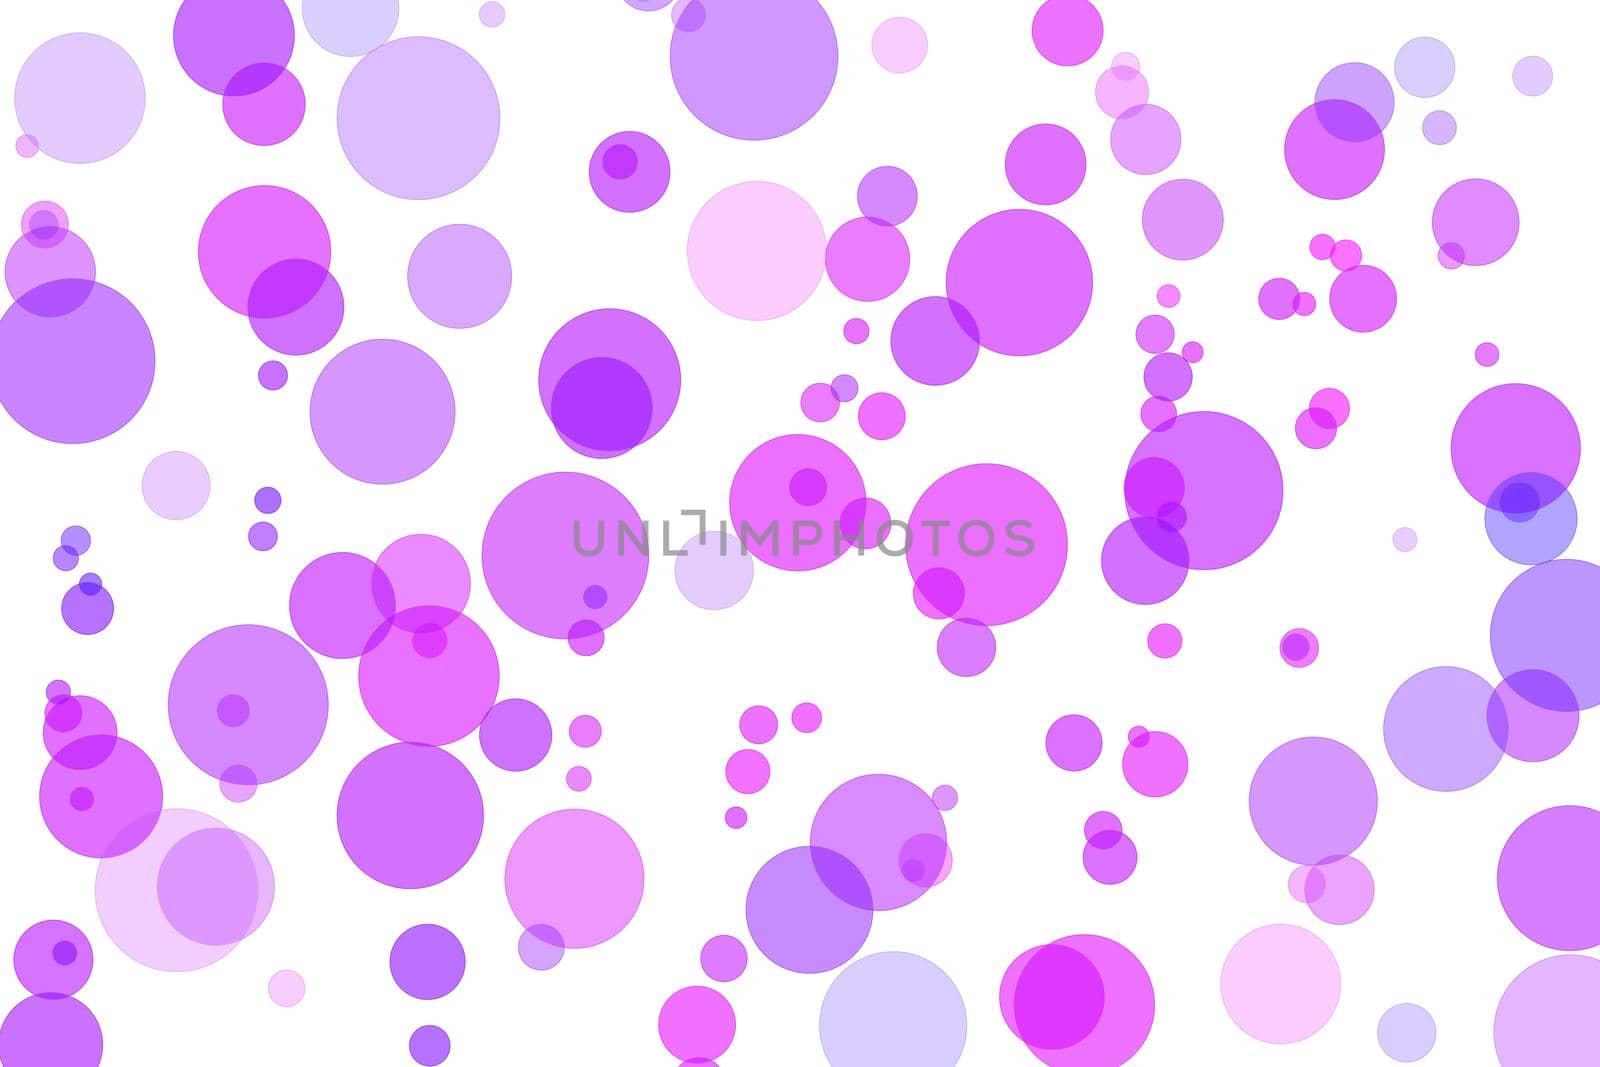 abstract background with circles of different sizes in burgundy and pink colors by Eldashev